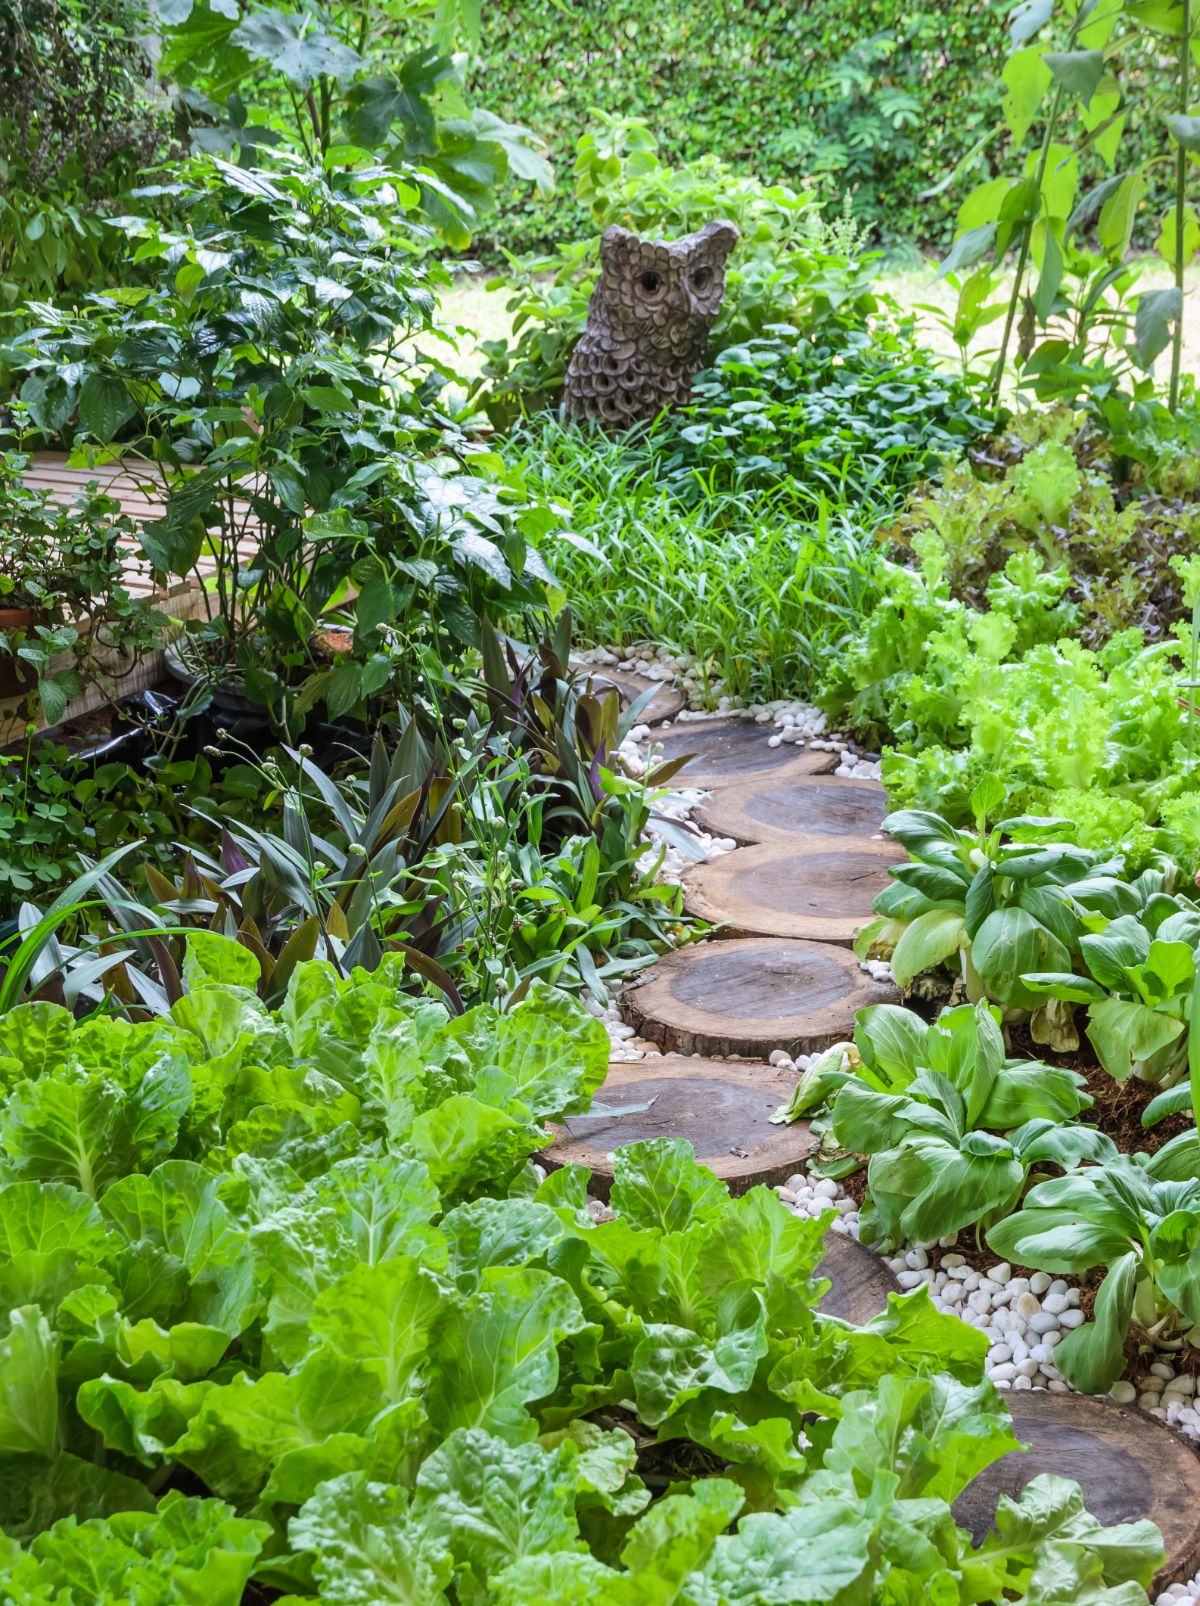 A nicely-laid wood path in a vegetable garden